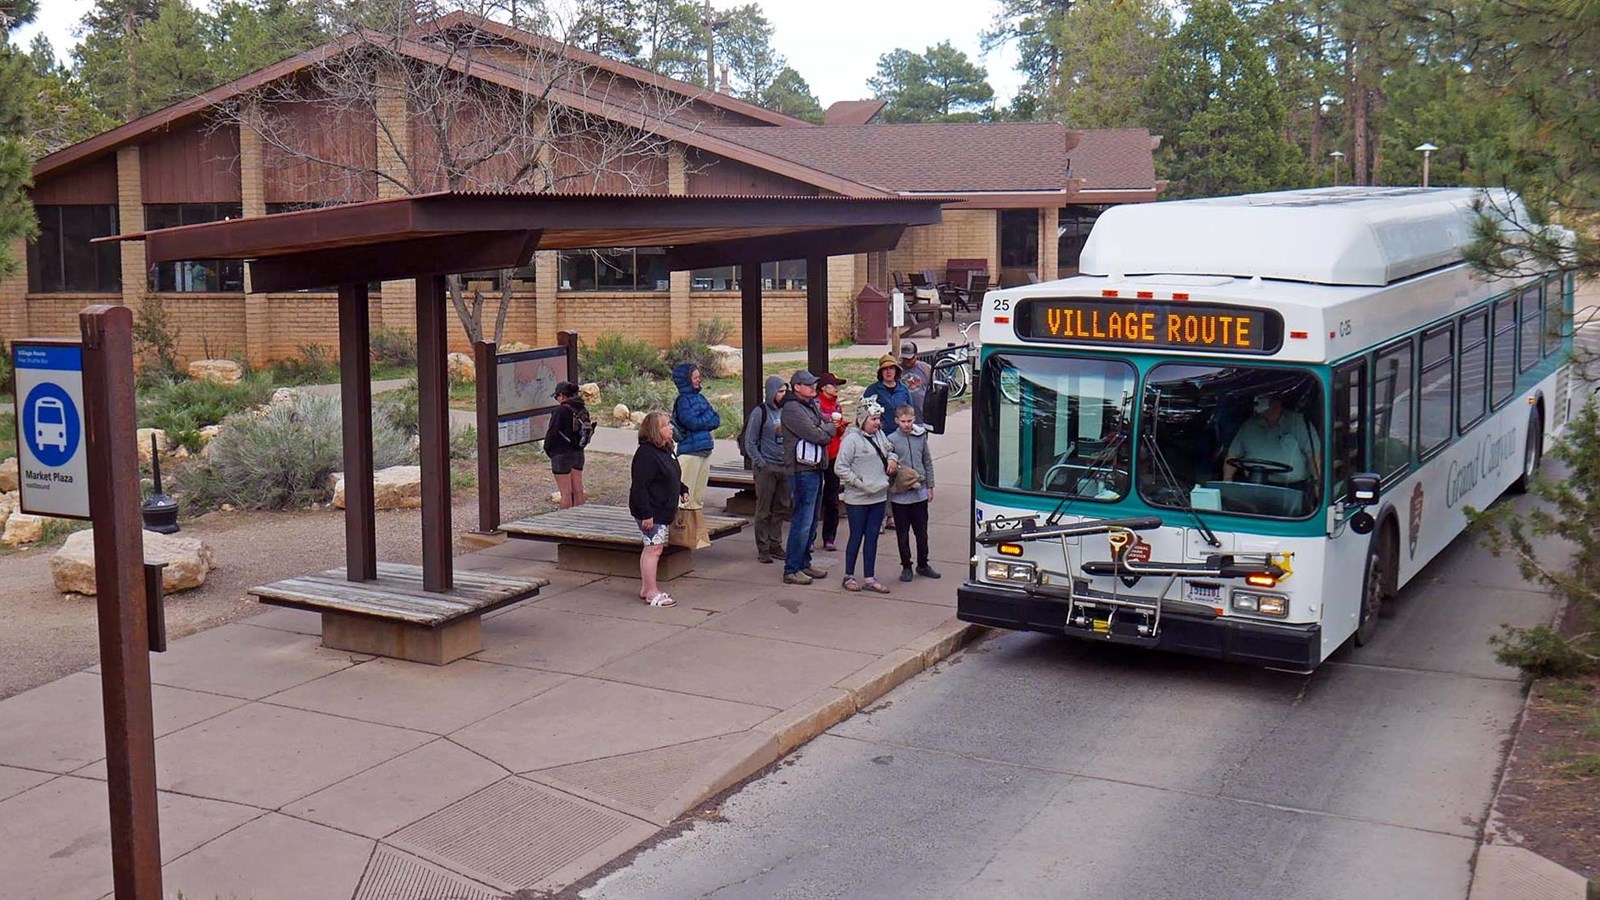 from under the roof of an open air bus shelter, several people are about to board a white and green 